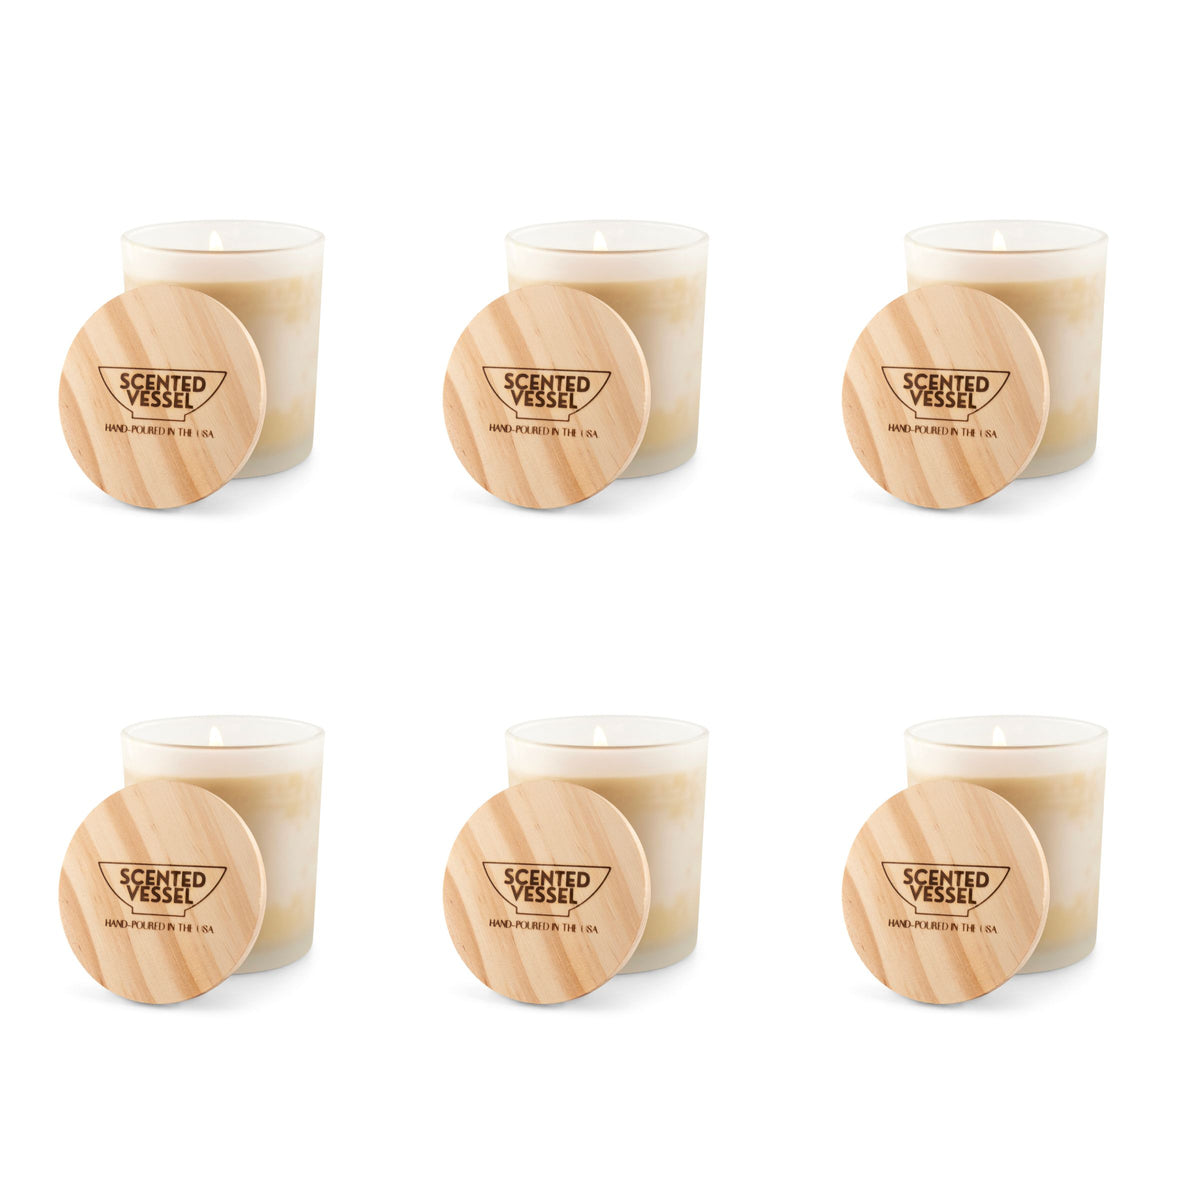 Coffee & Cream 7.5oz Soy Wax Blend Candle by Scented Vessel (6 Pack)